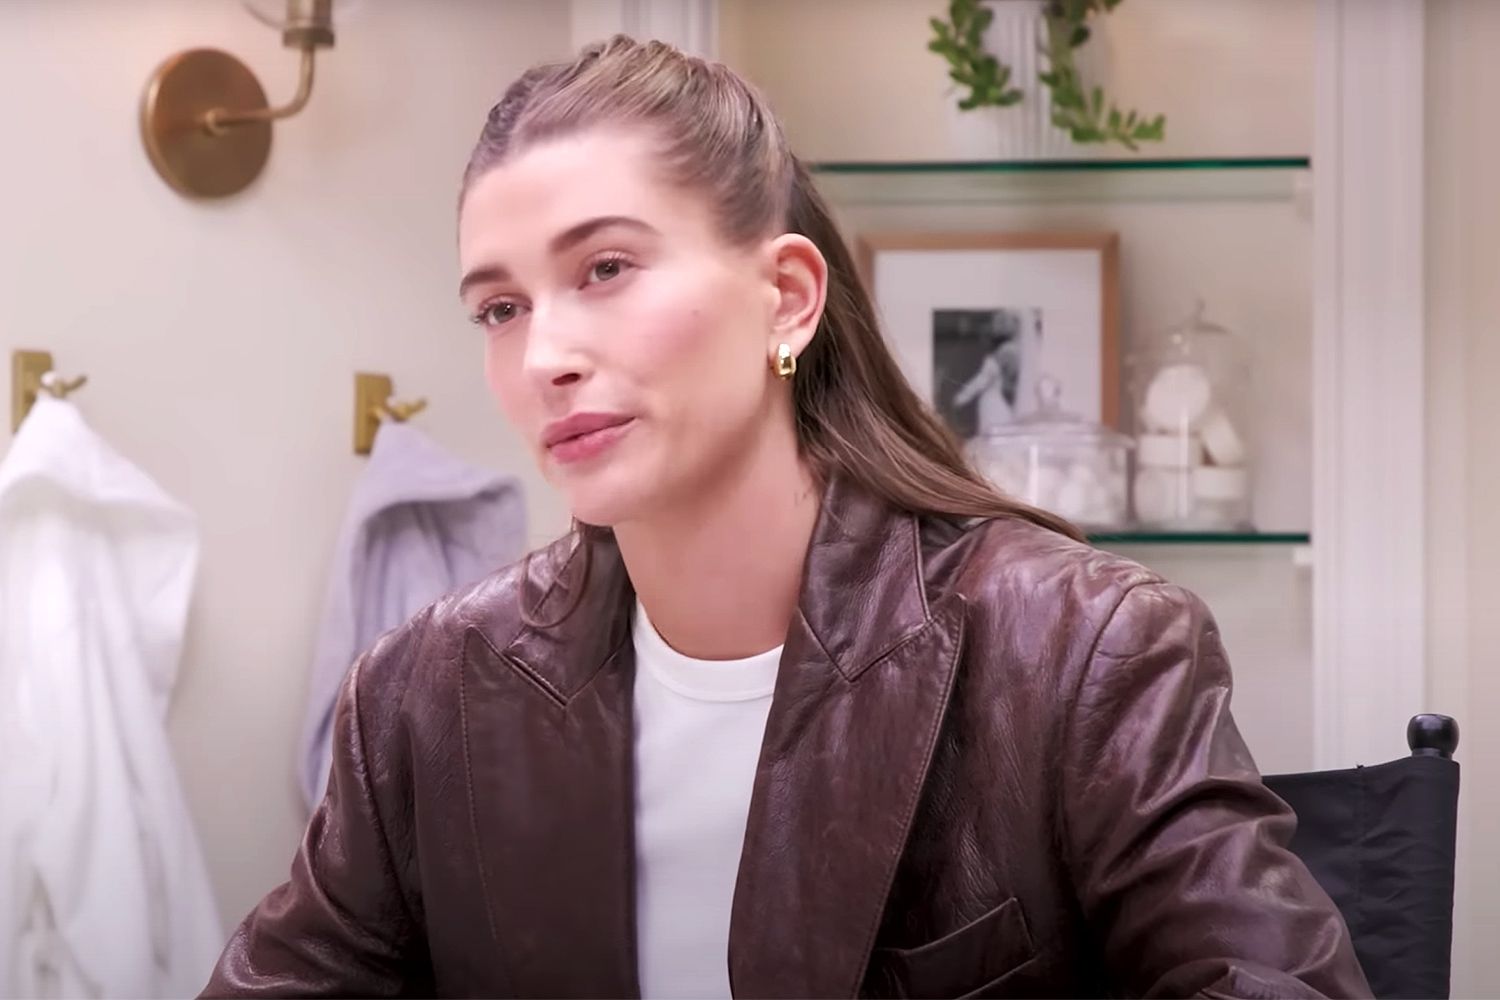 Hailey Baldwin Says Therapy Was a ‘Game Changer’ for Her Mental Health: ‘I Feel Really Safe’